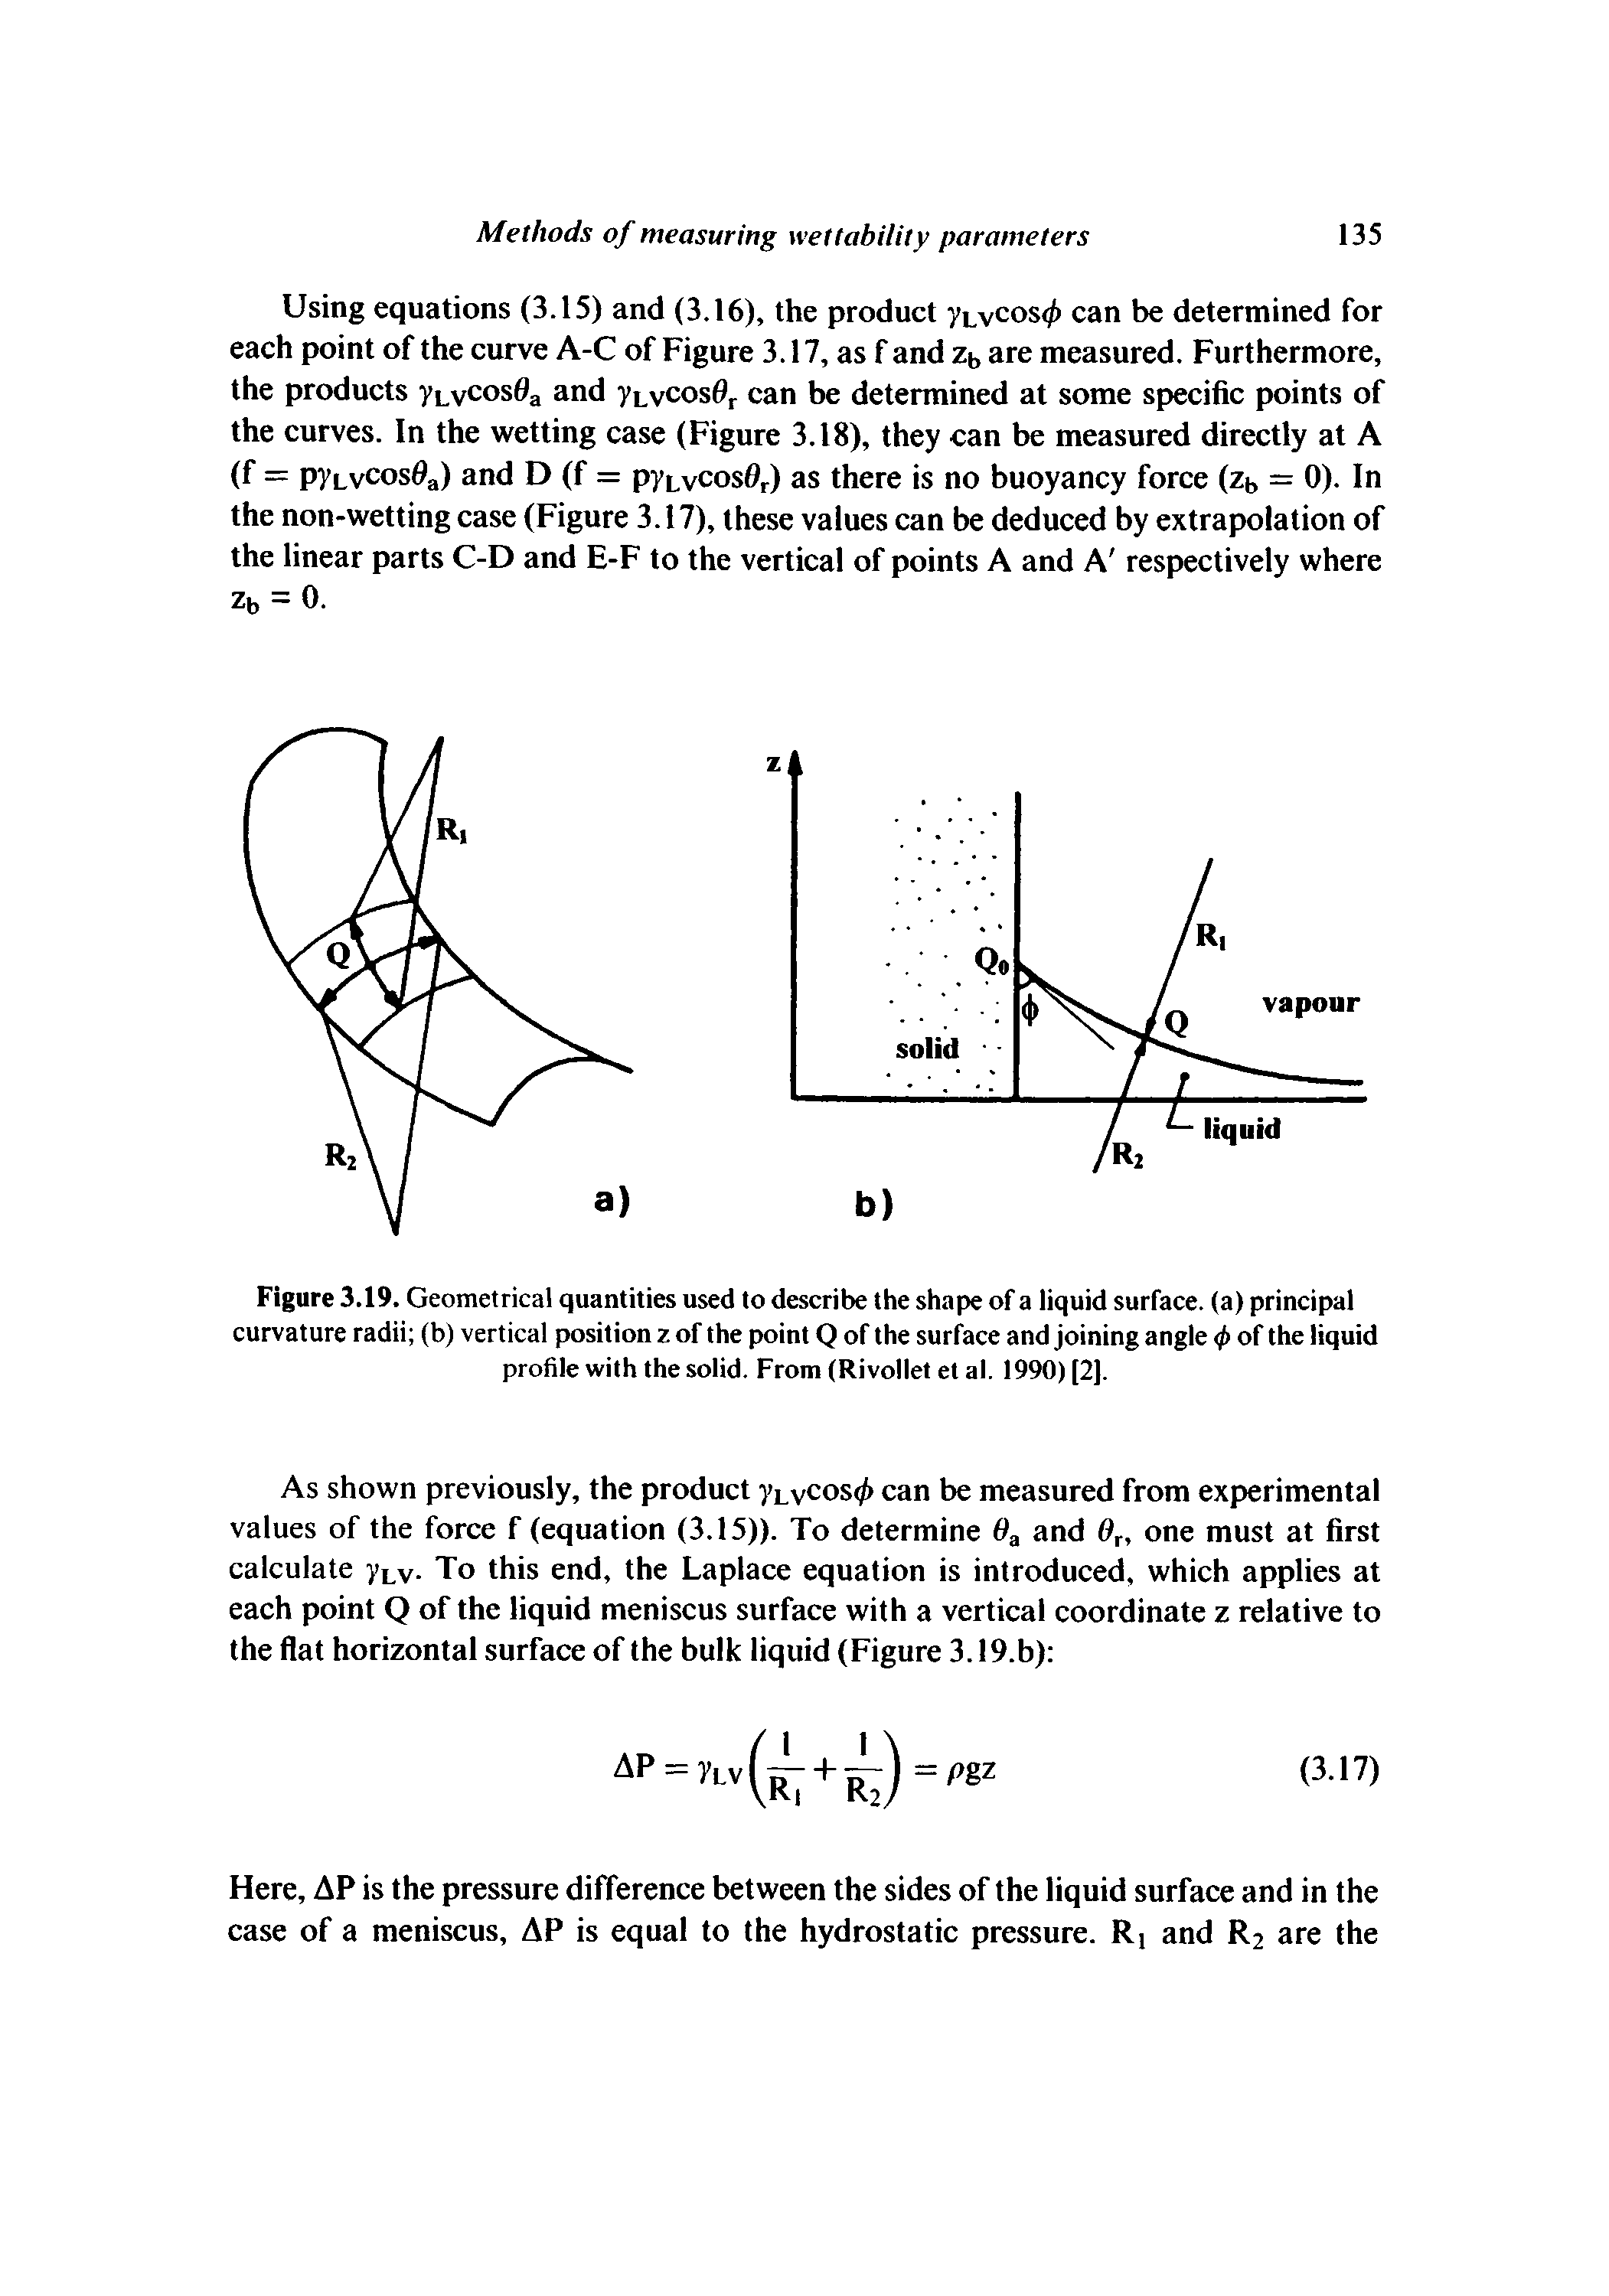 Figure 3.19. Geometrical quantities used to describe the shape of a liquid surface, (a) principal curvature radii (b) vertical position z of the point Q of the surface and joining angle <p of the liquid profile with the solid. From (Rivollet et al. 1990) [2J.